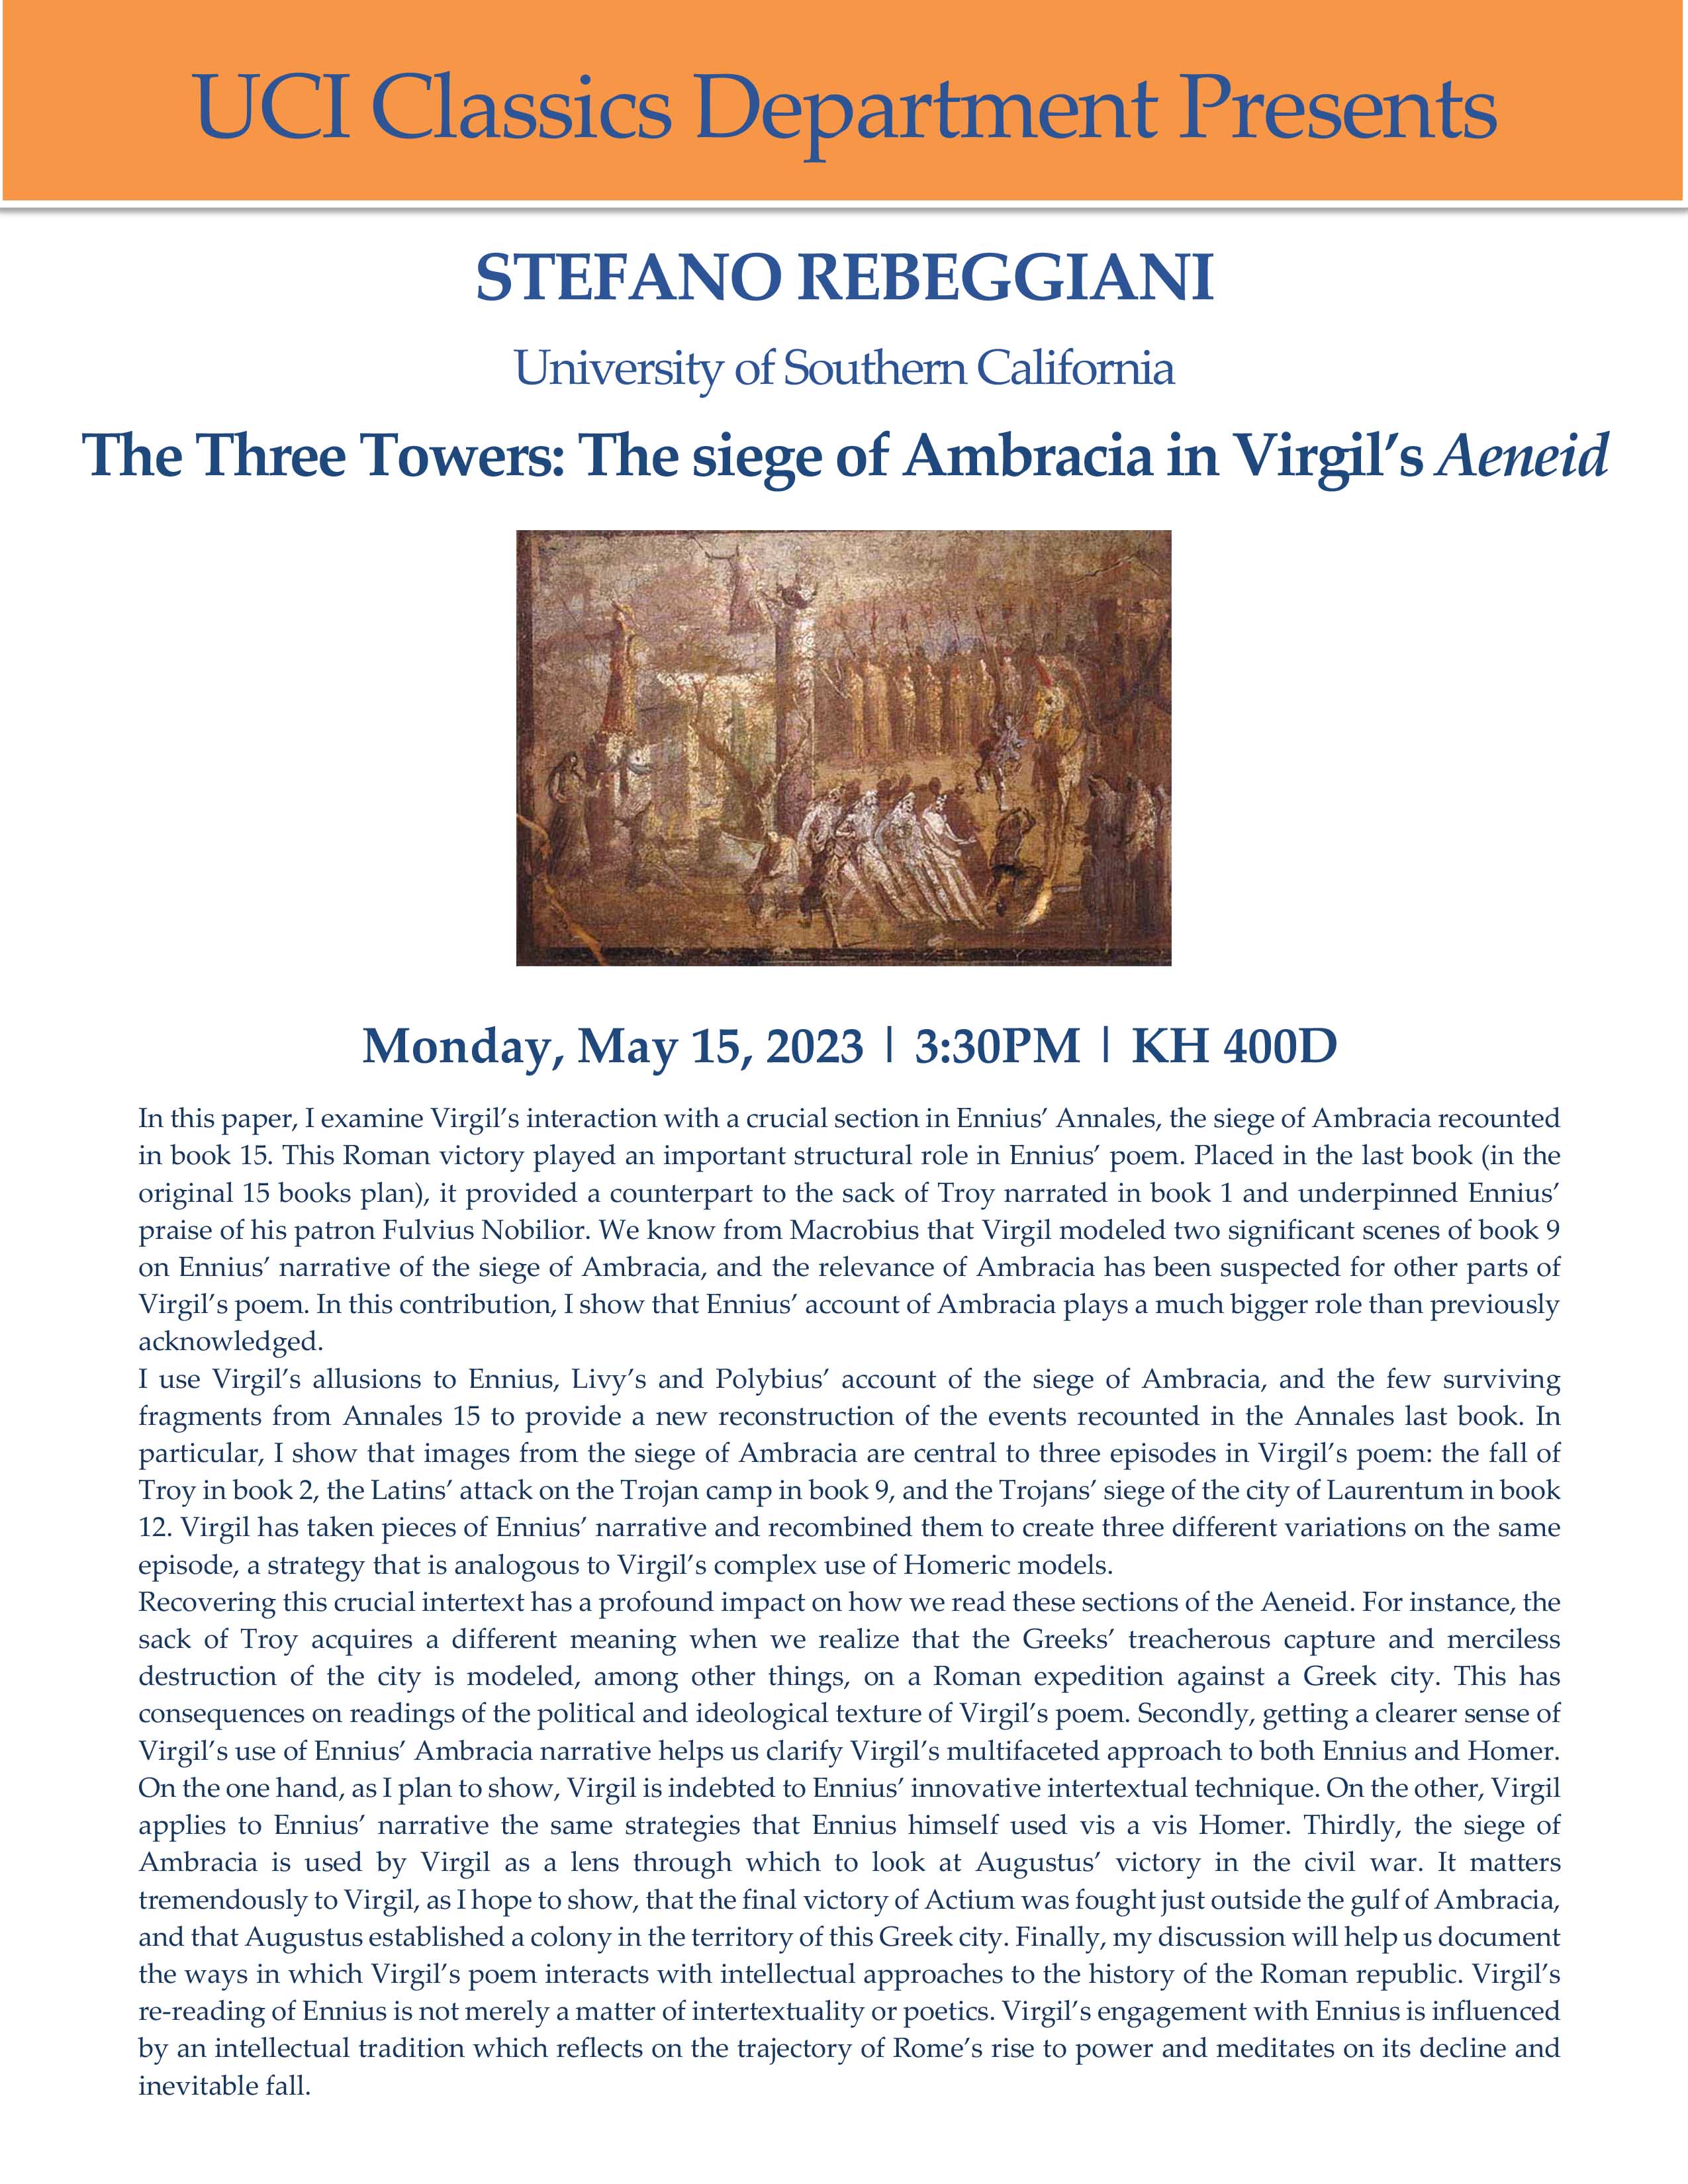 Stefano Rebeggianai May 15 at 3:30PM in KH 400D